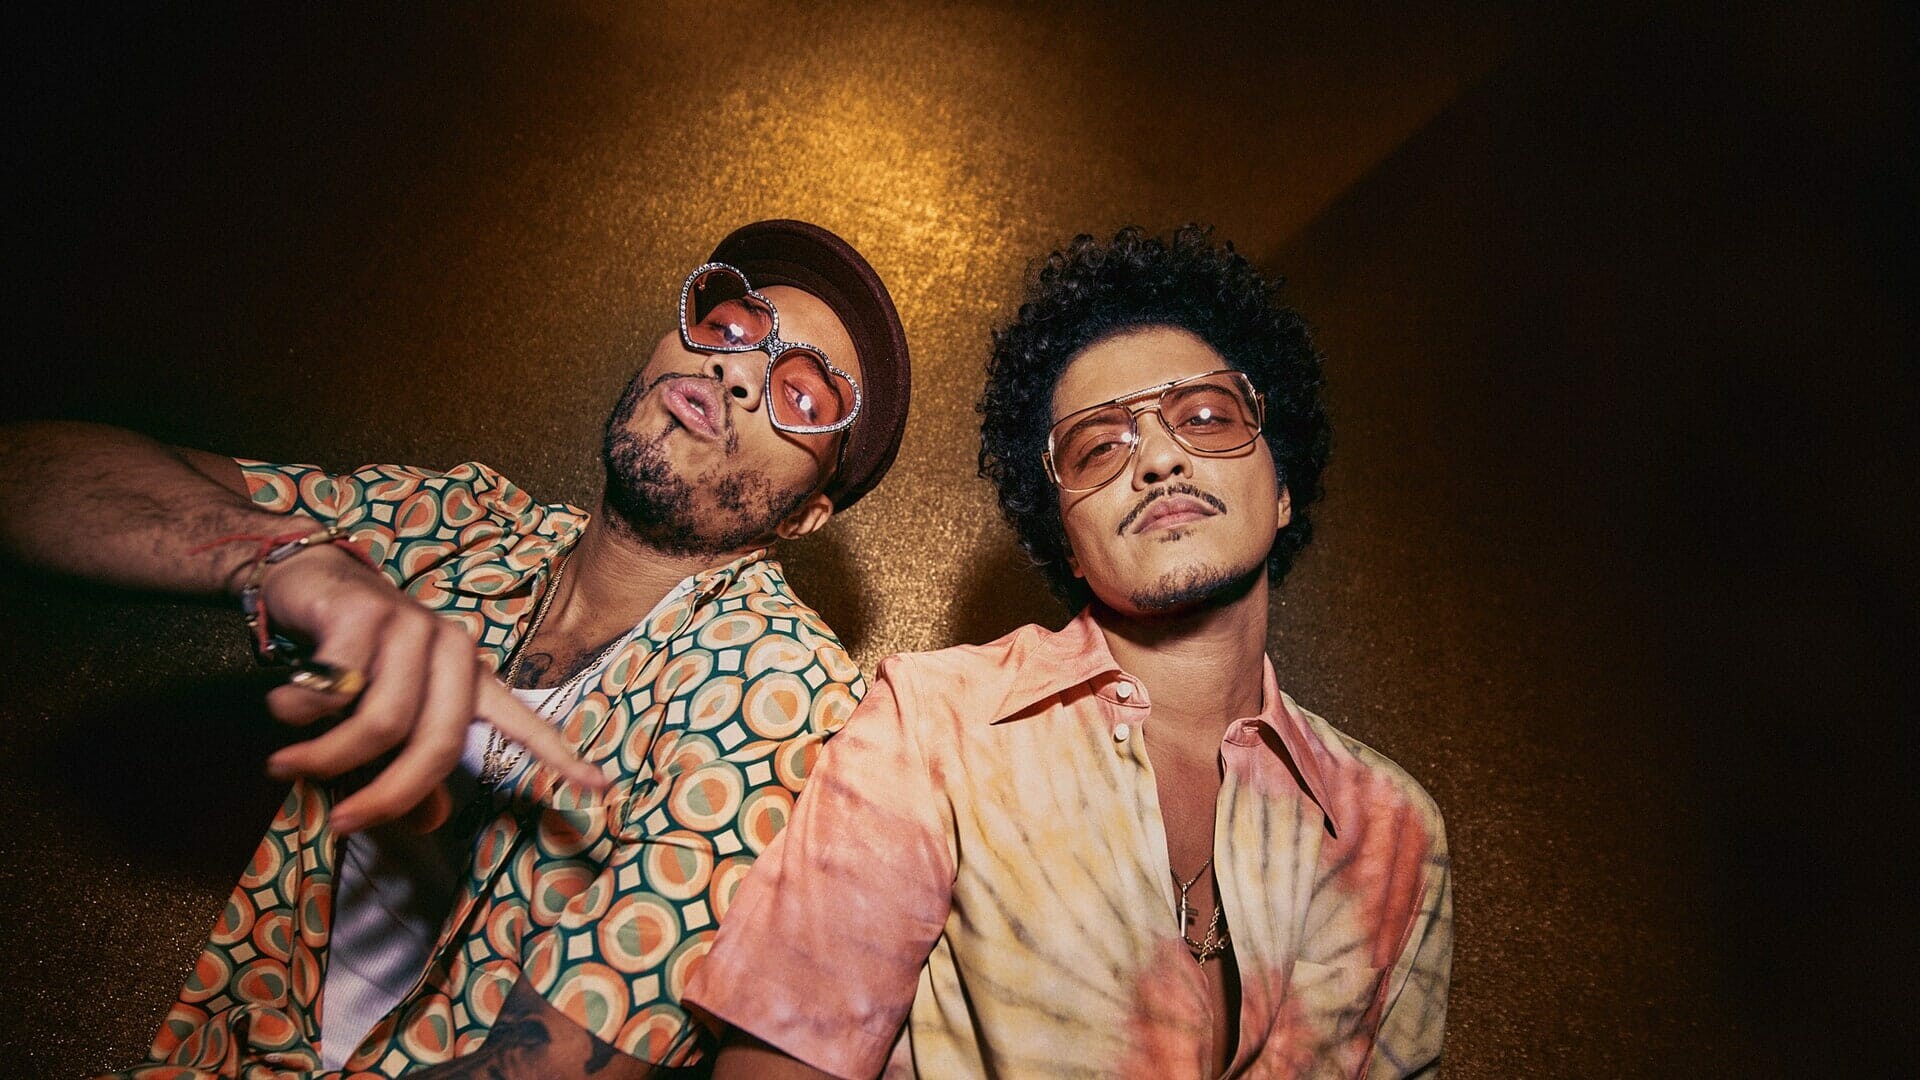 Silk Sonic: Bruno Mars, Anderson .Paak, The duo hosted a "Summertime Jam" in 2021. 1920x1080 Full HD Background.